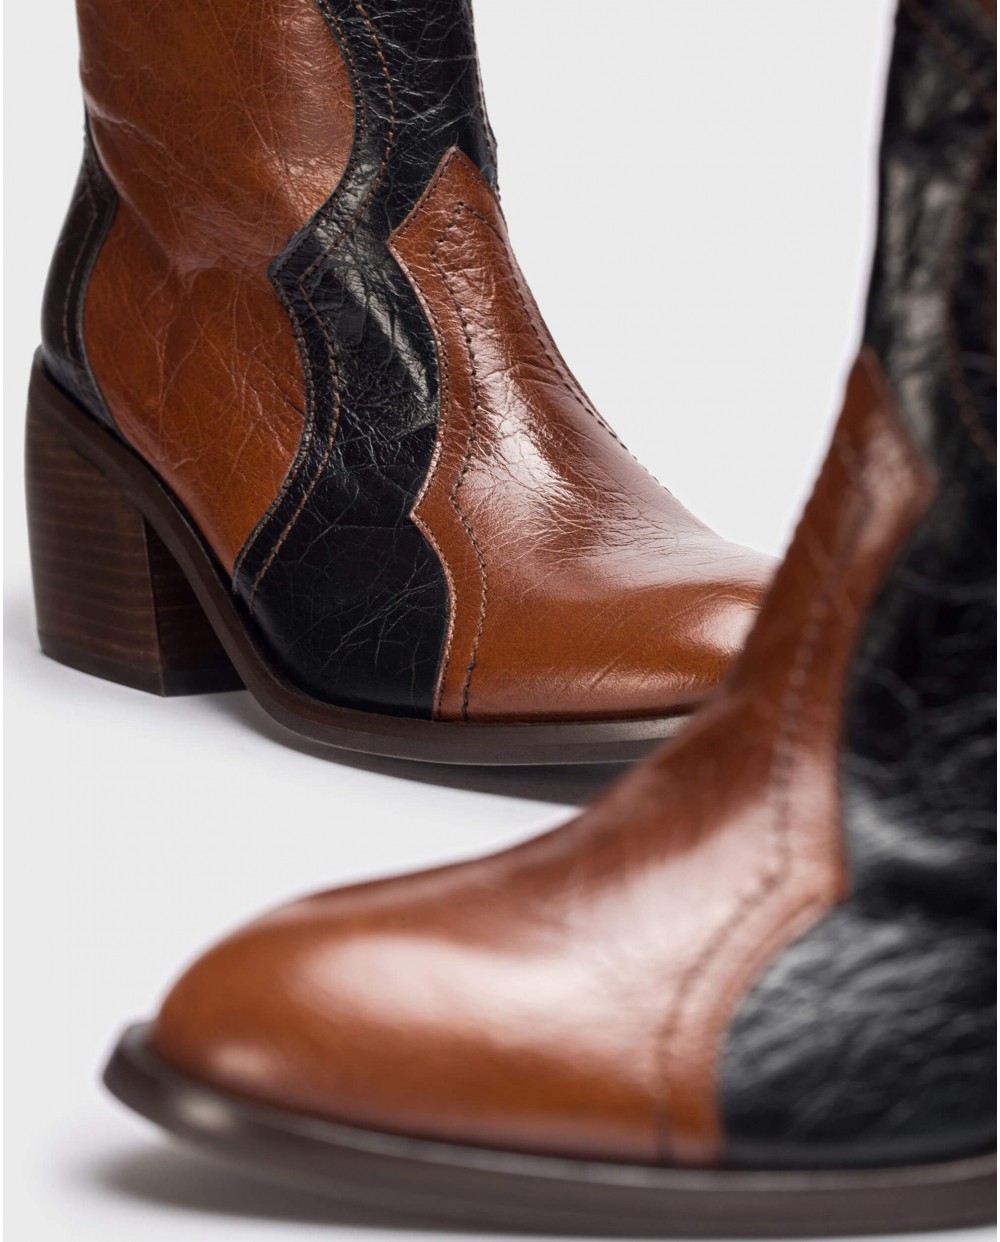 Wonders-Ankle Boots-Brown COTA ankle boot